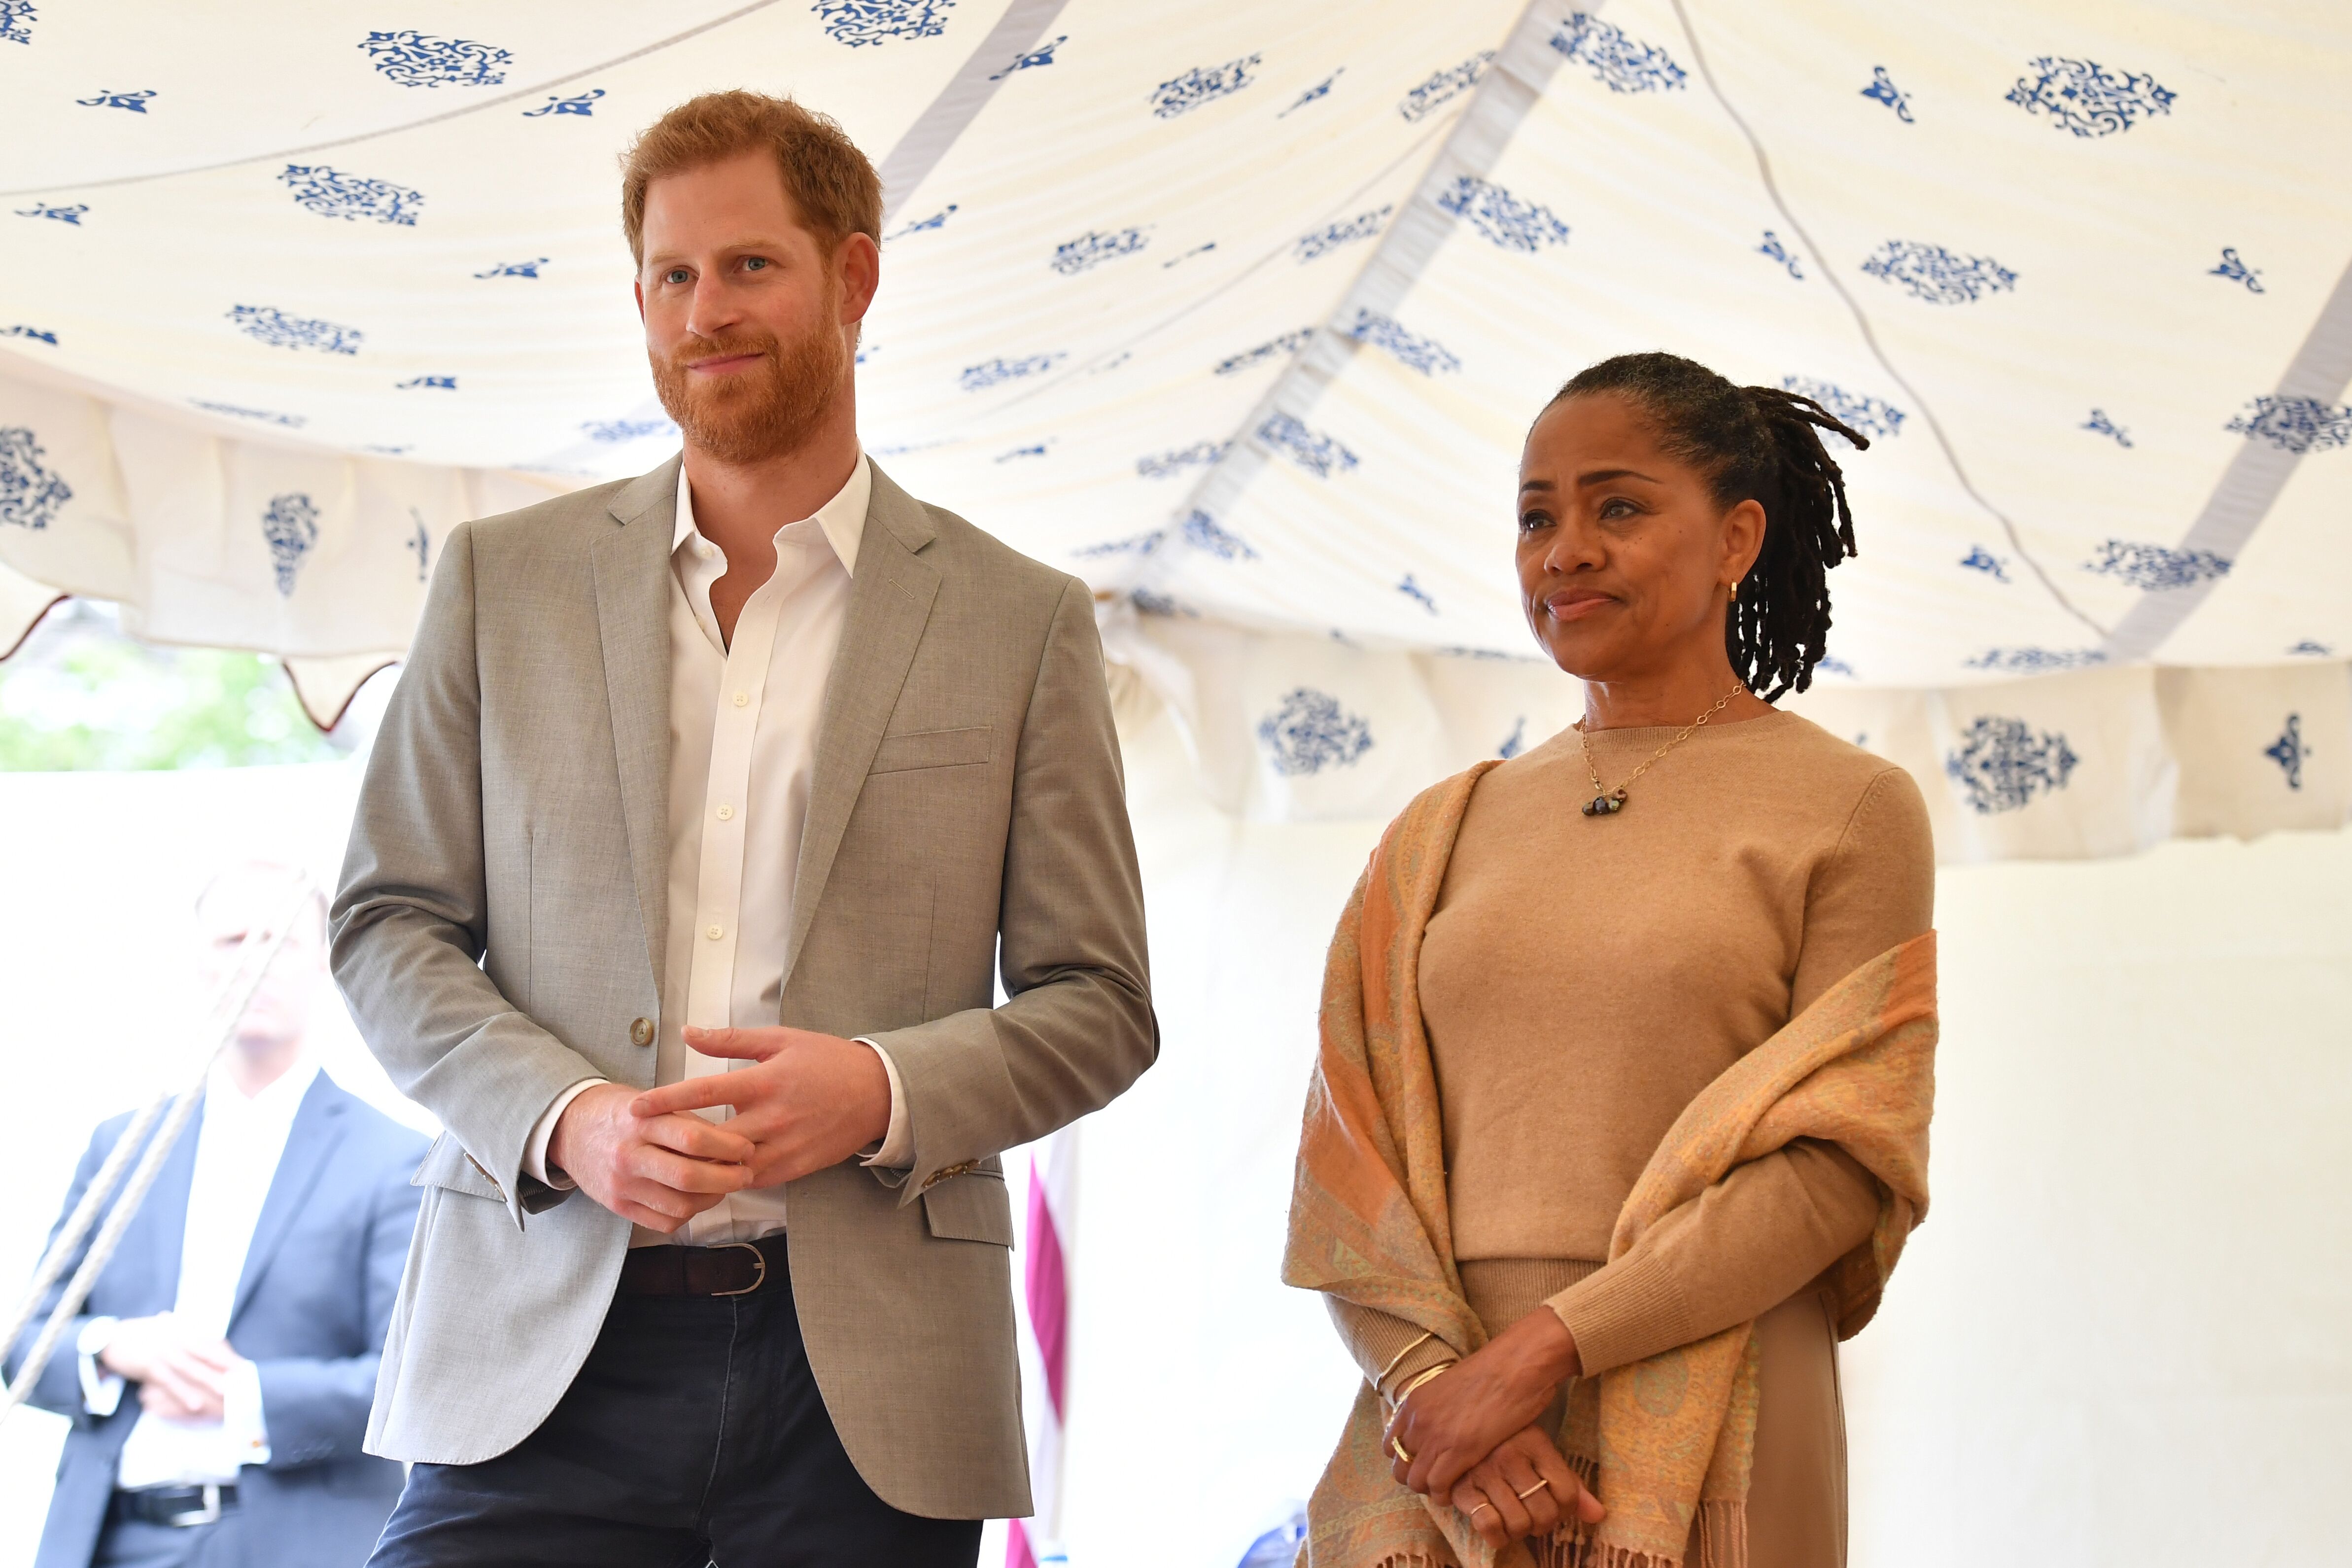 Prince Harry, Duke of Sussex and Doria Ragland listen to Meghan, Duchess of Sussex speaking at an event to mark the launch of a cookbook with recipes from a group of women affected by the Grenfell Tower fire at Kensington Palace. | Photo: Getty Images